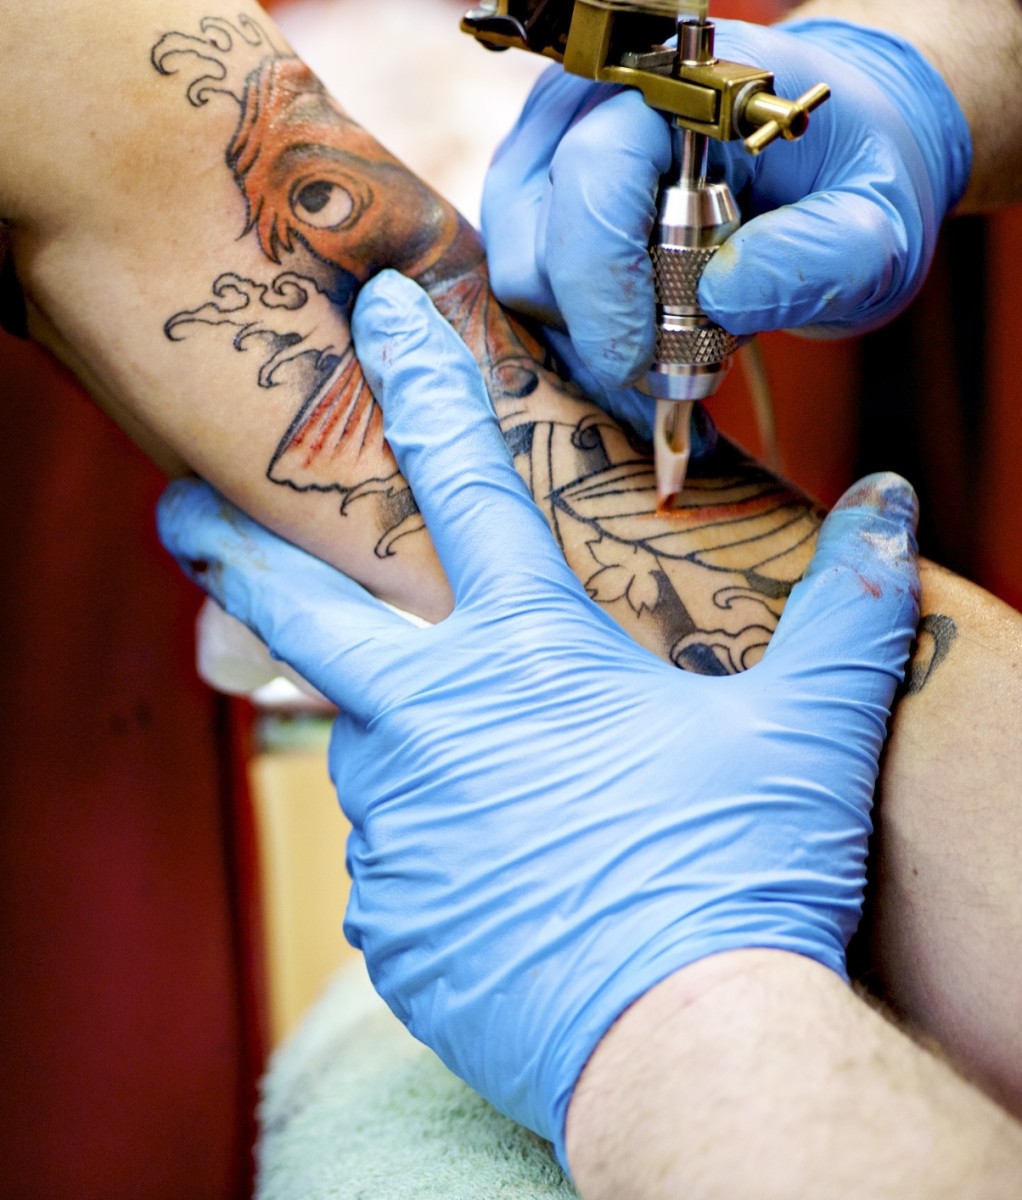 Tattoo Care Instructions – How to Take Care of a New Tattoo?